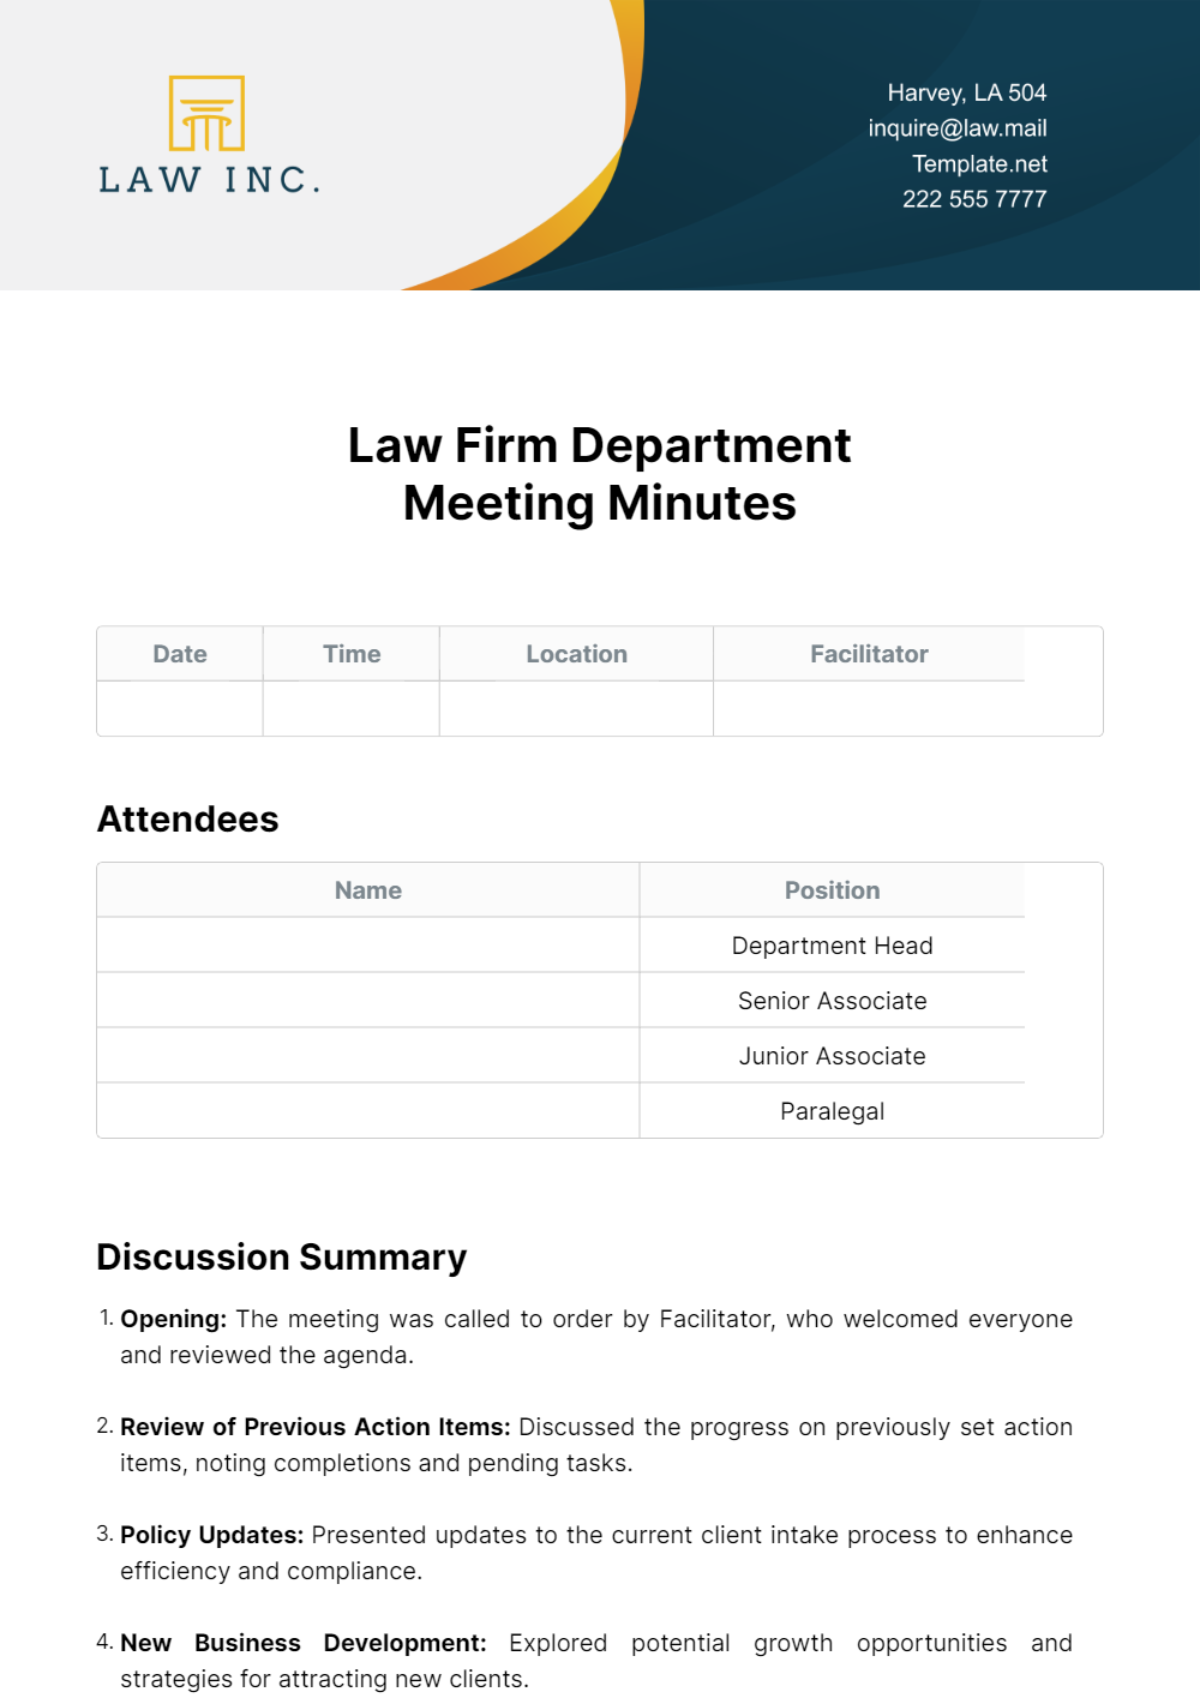 Law Firm Department Meeting Minutes Template